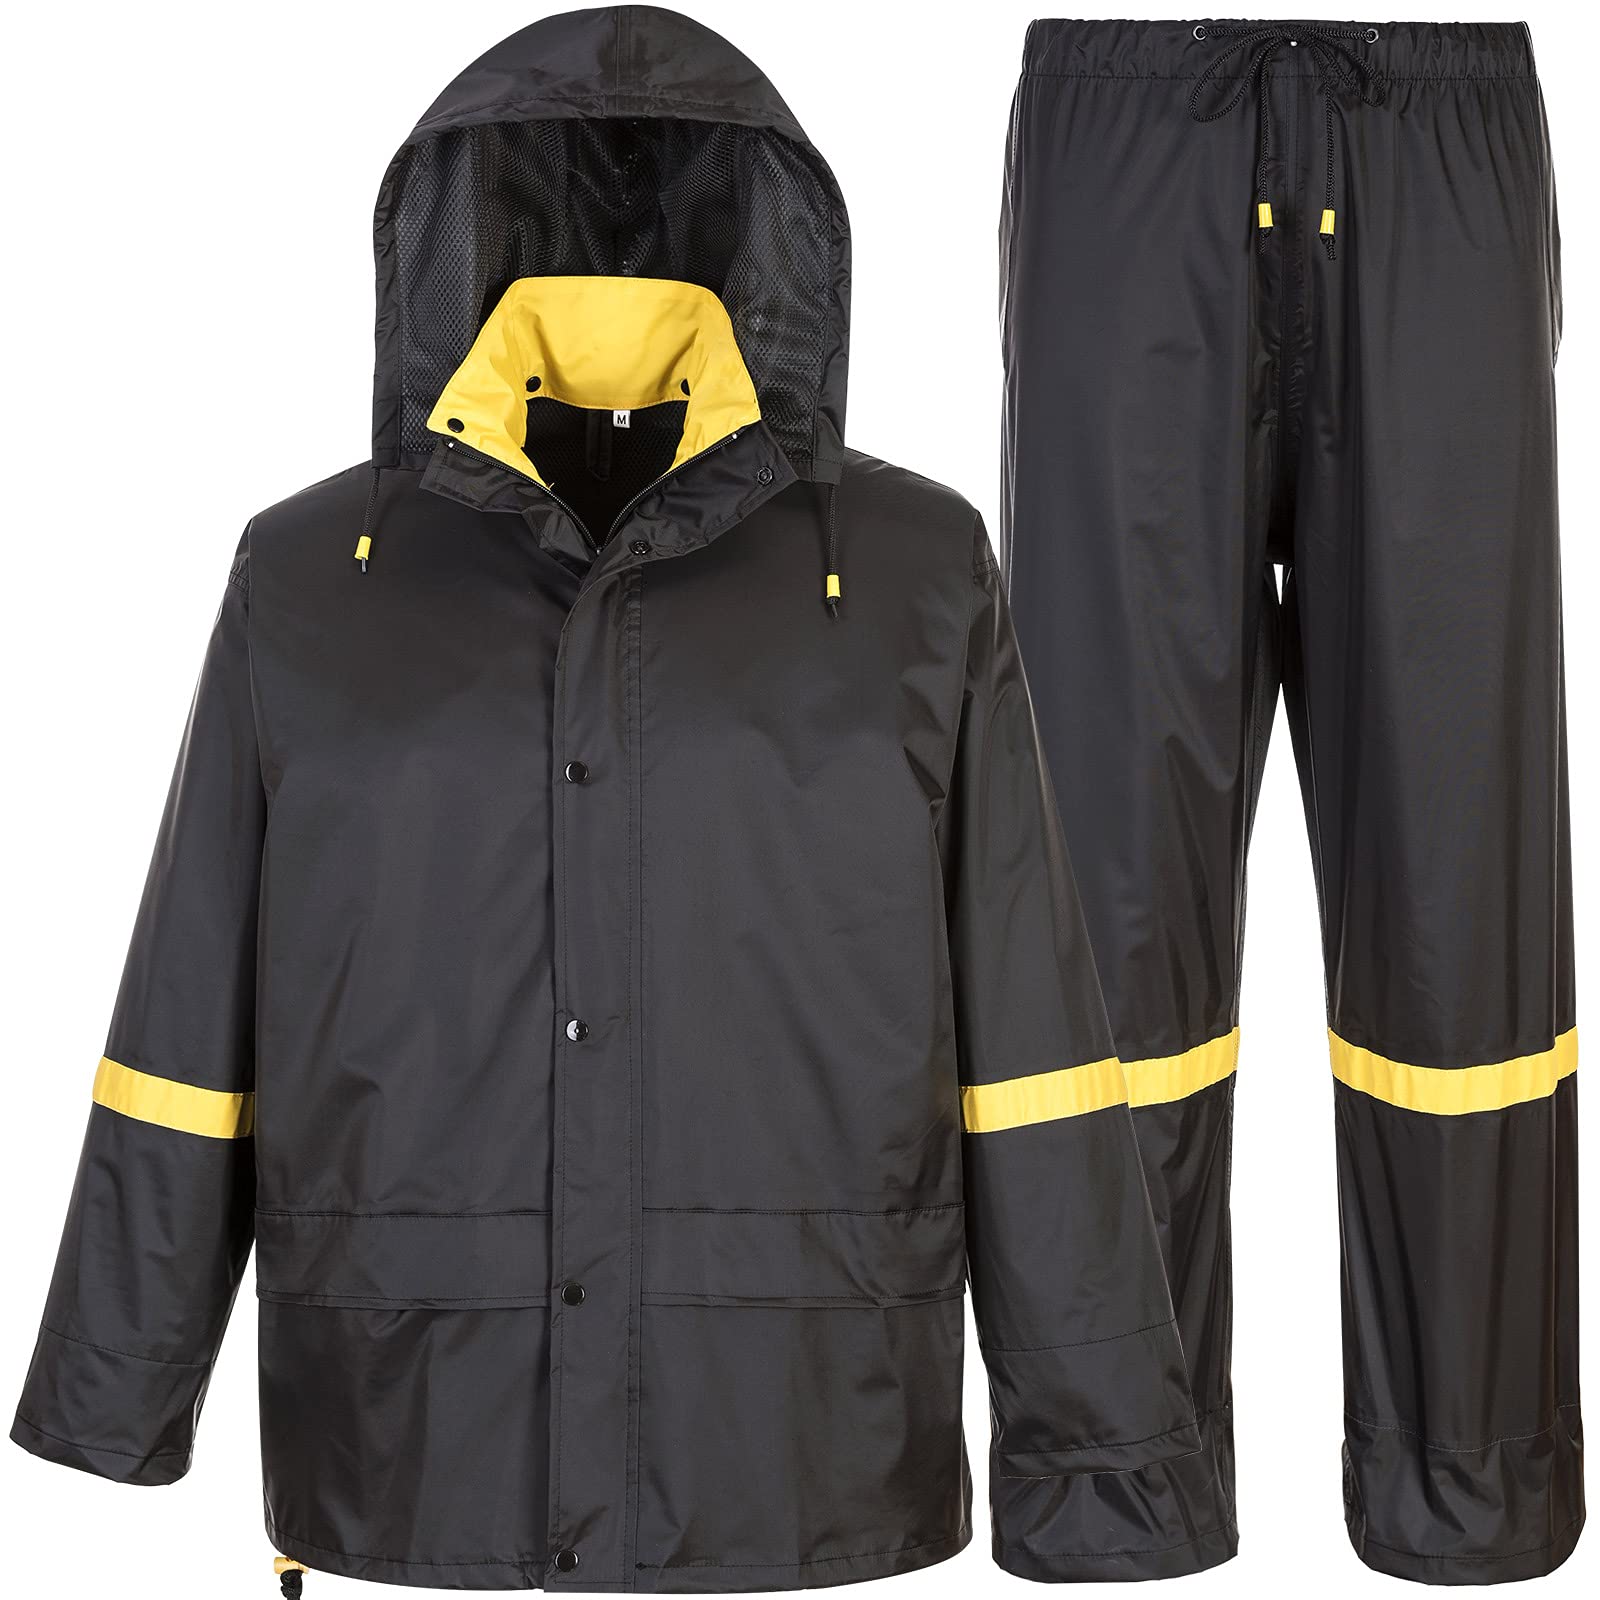 Classic Rain Suits for Men Breathable Rain Gear for Waterproof work, Hooded Coats Jacket and Pants